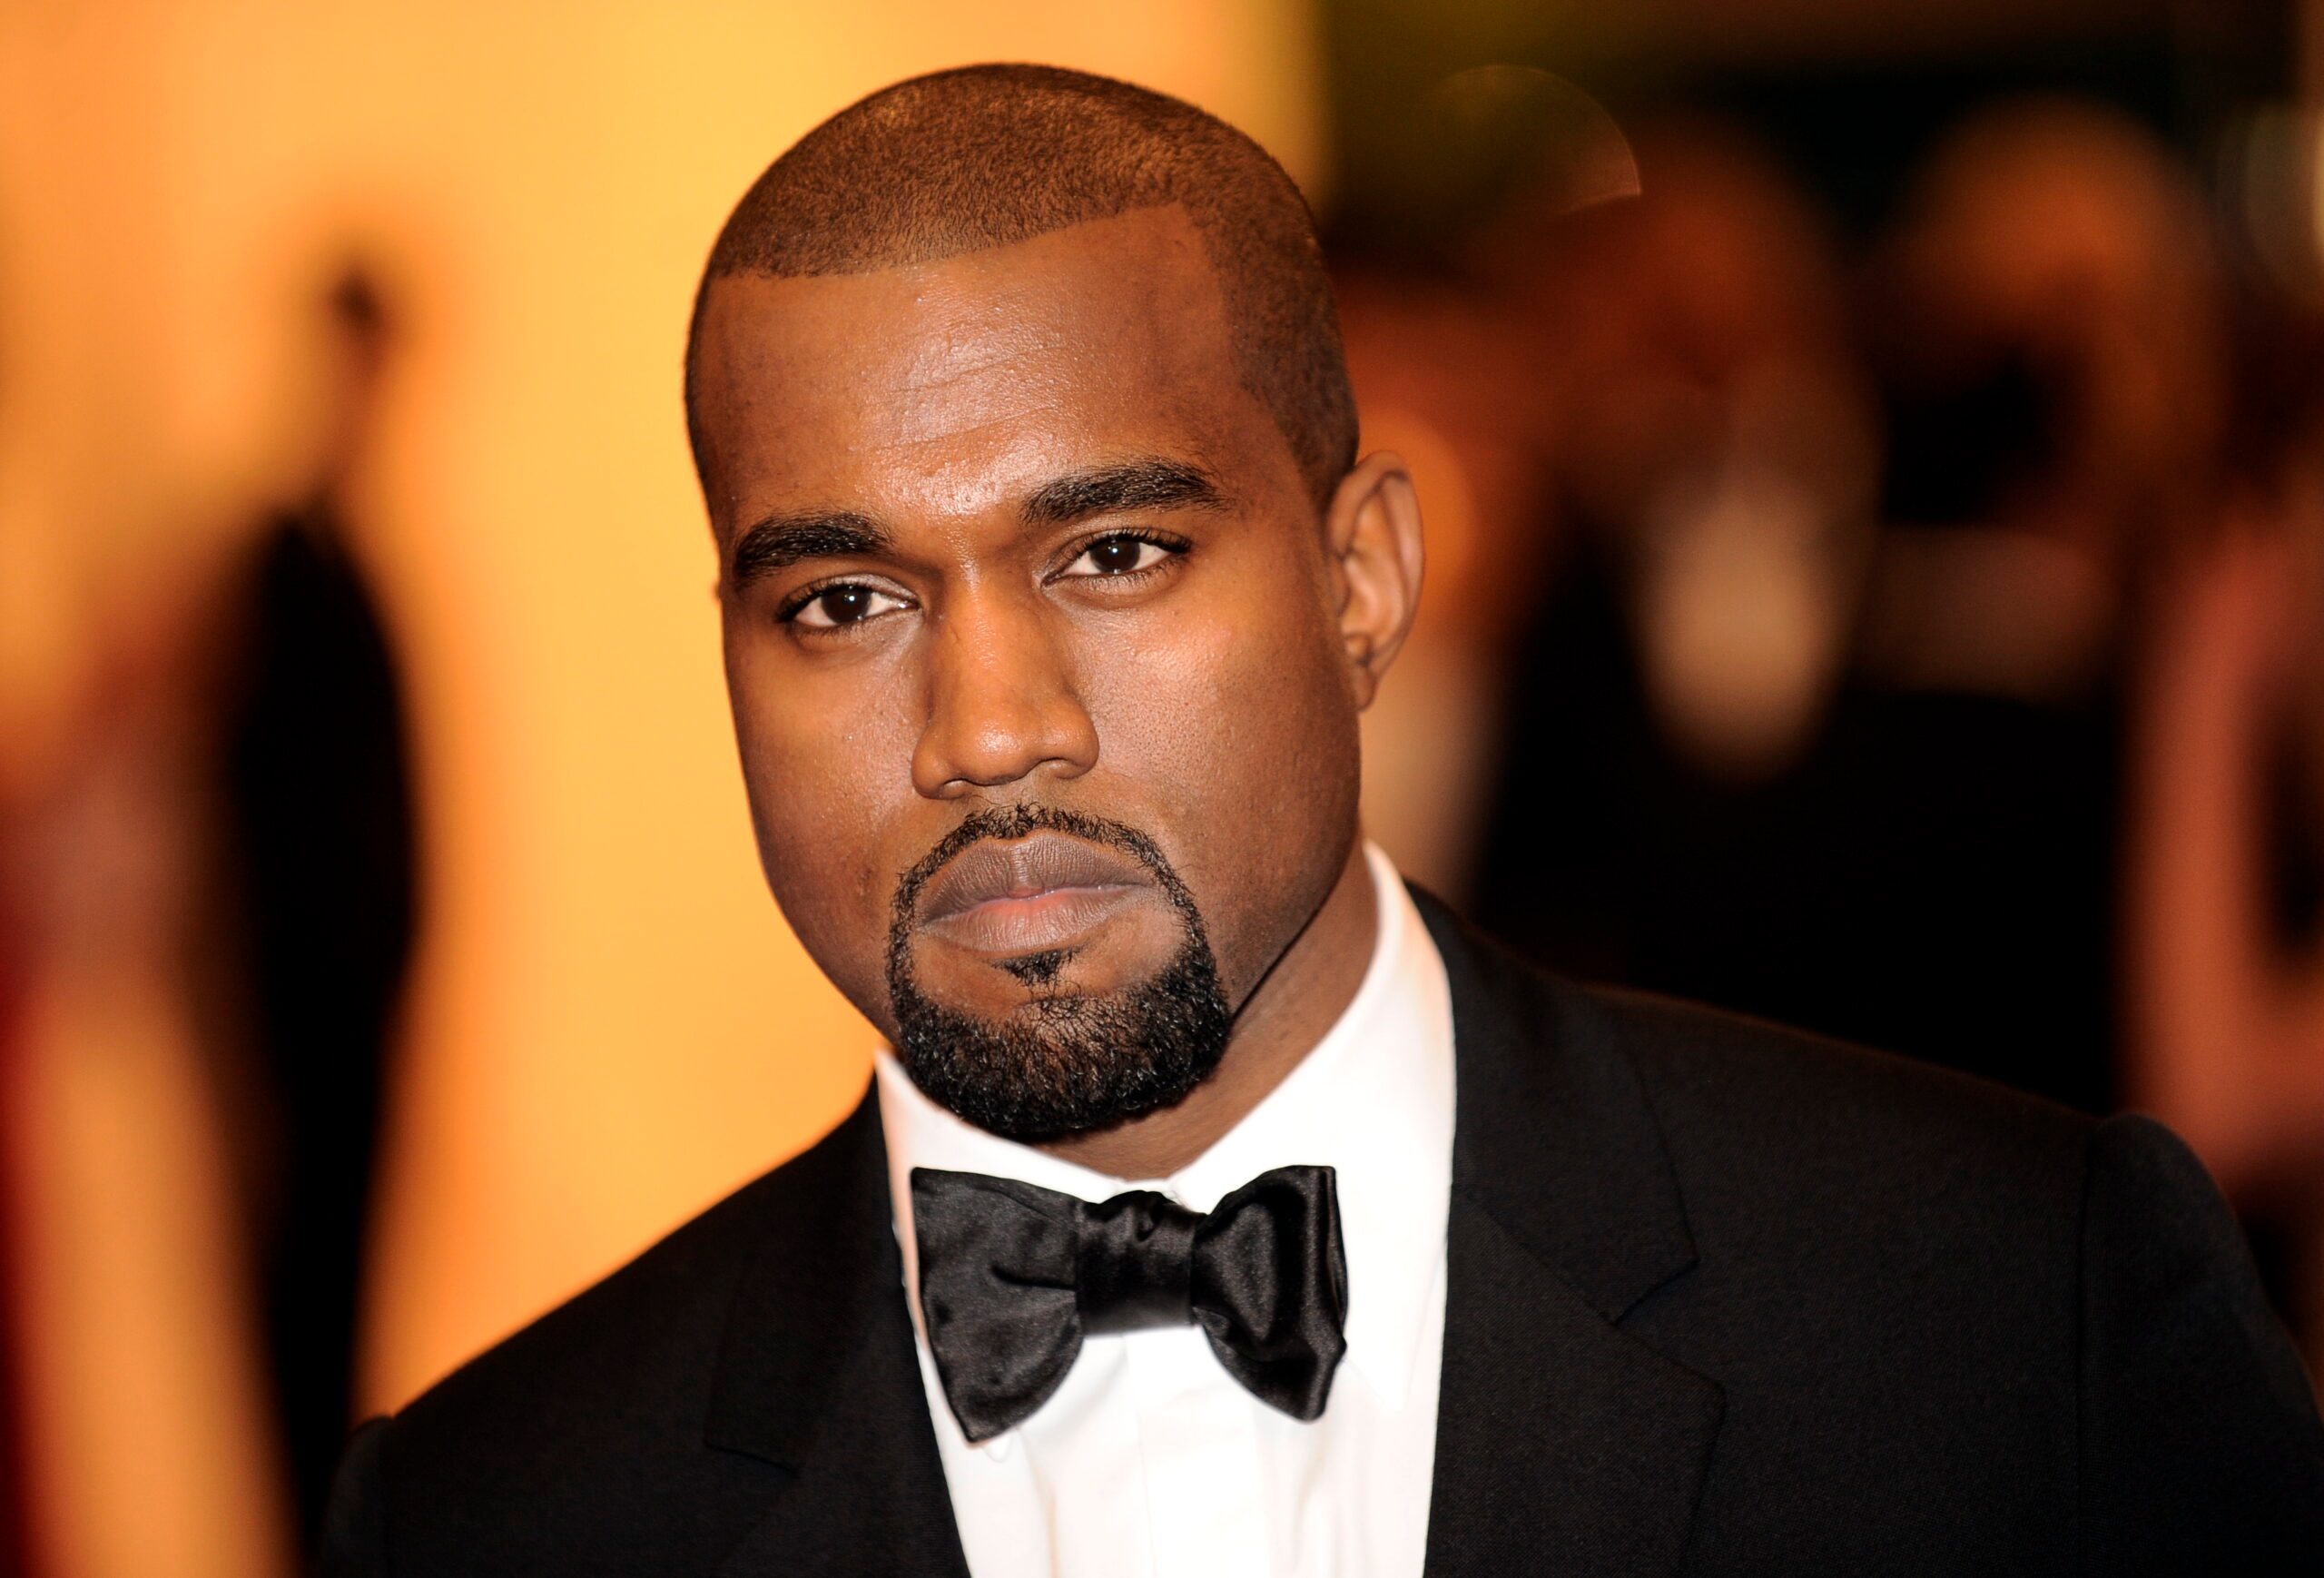 Kanye West reaches out to Mark Zuckerberg, claims to be $53 million in personal debt